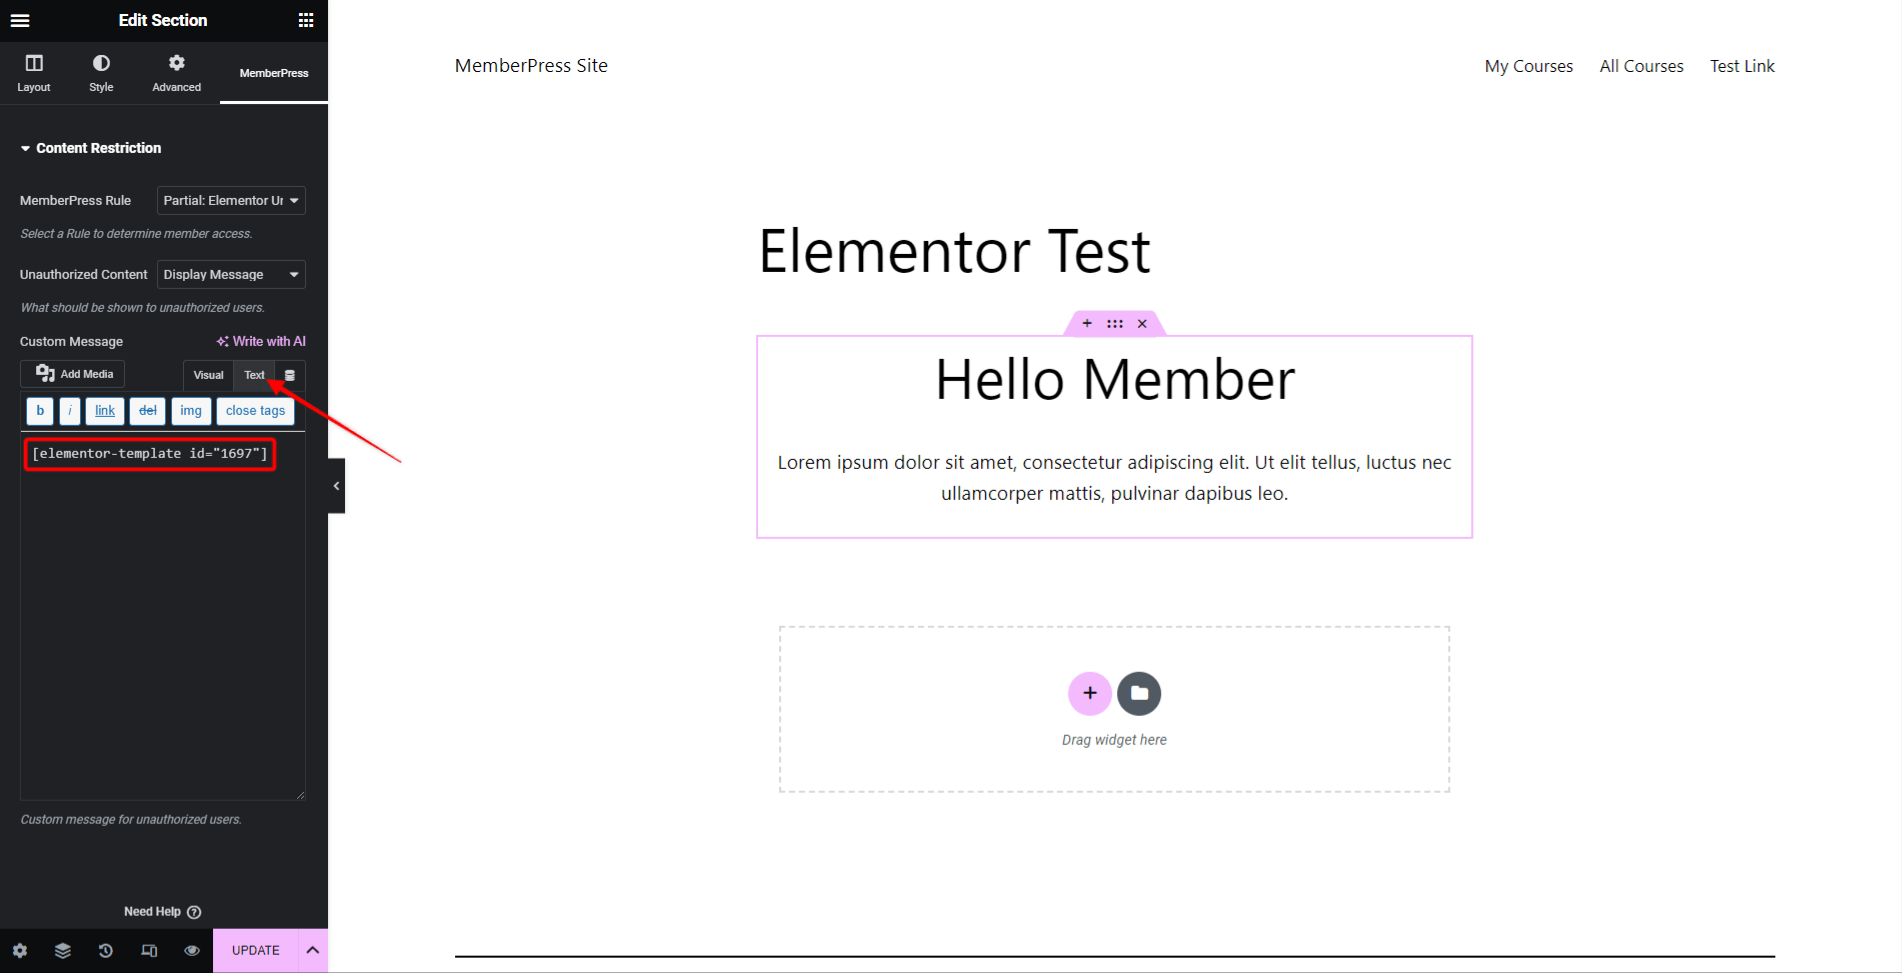 Add the Elementor template shortcode as Display Message